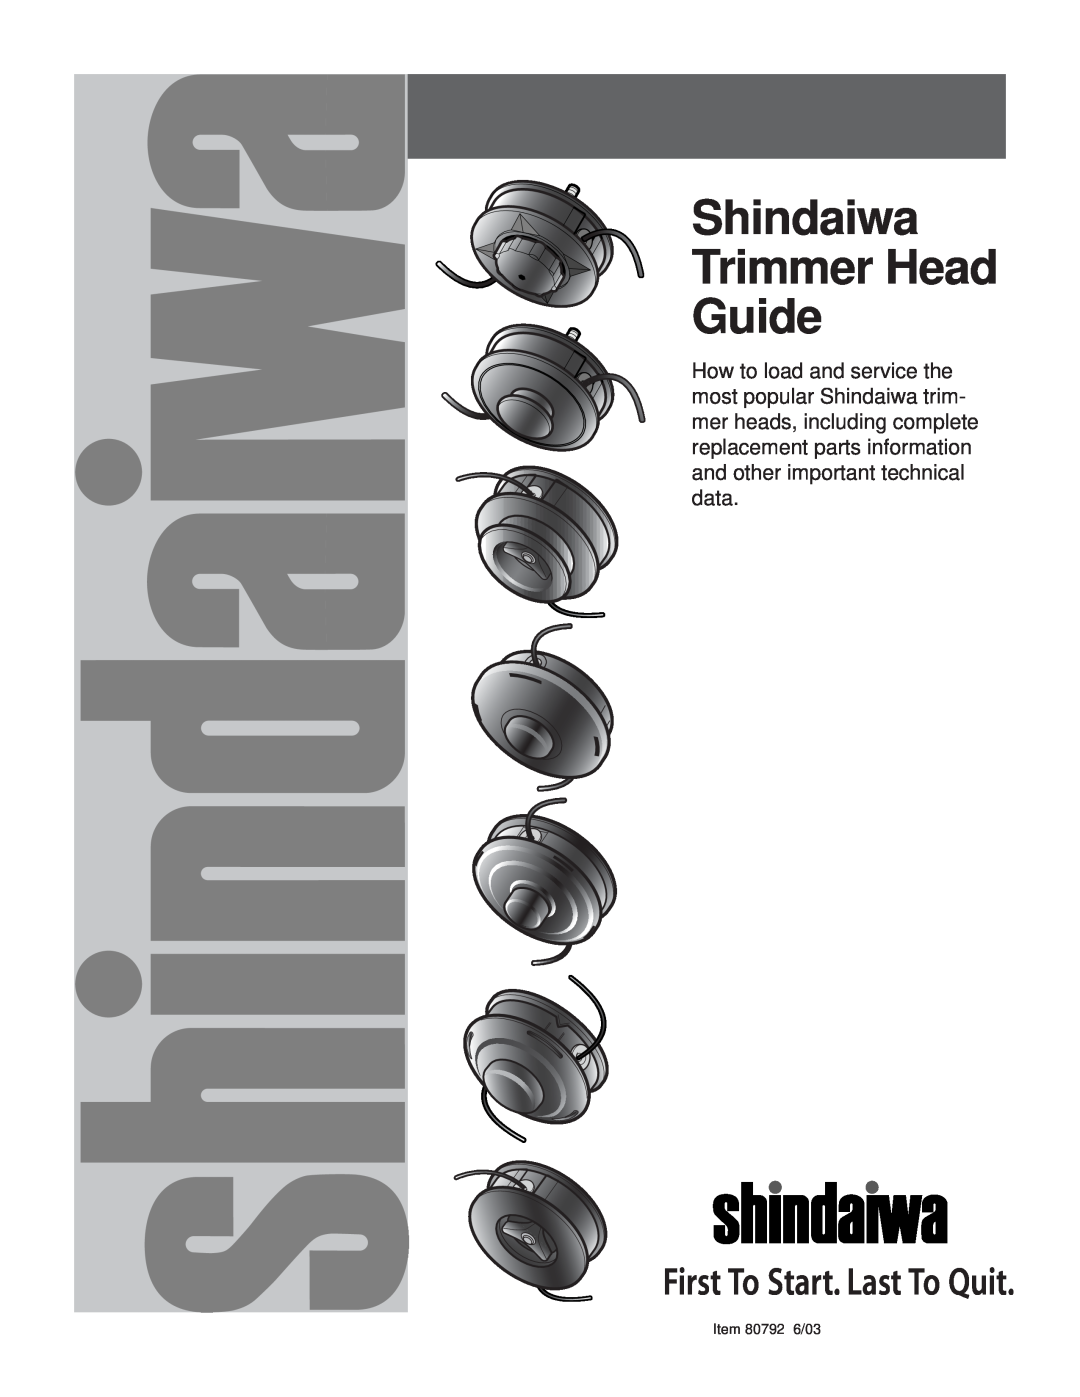 Husqvarna 80792 manual Shindaiwa Trimmer Head Guide, First To Start. Last To Quit 